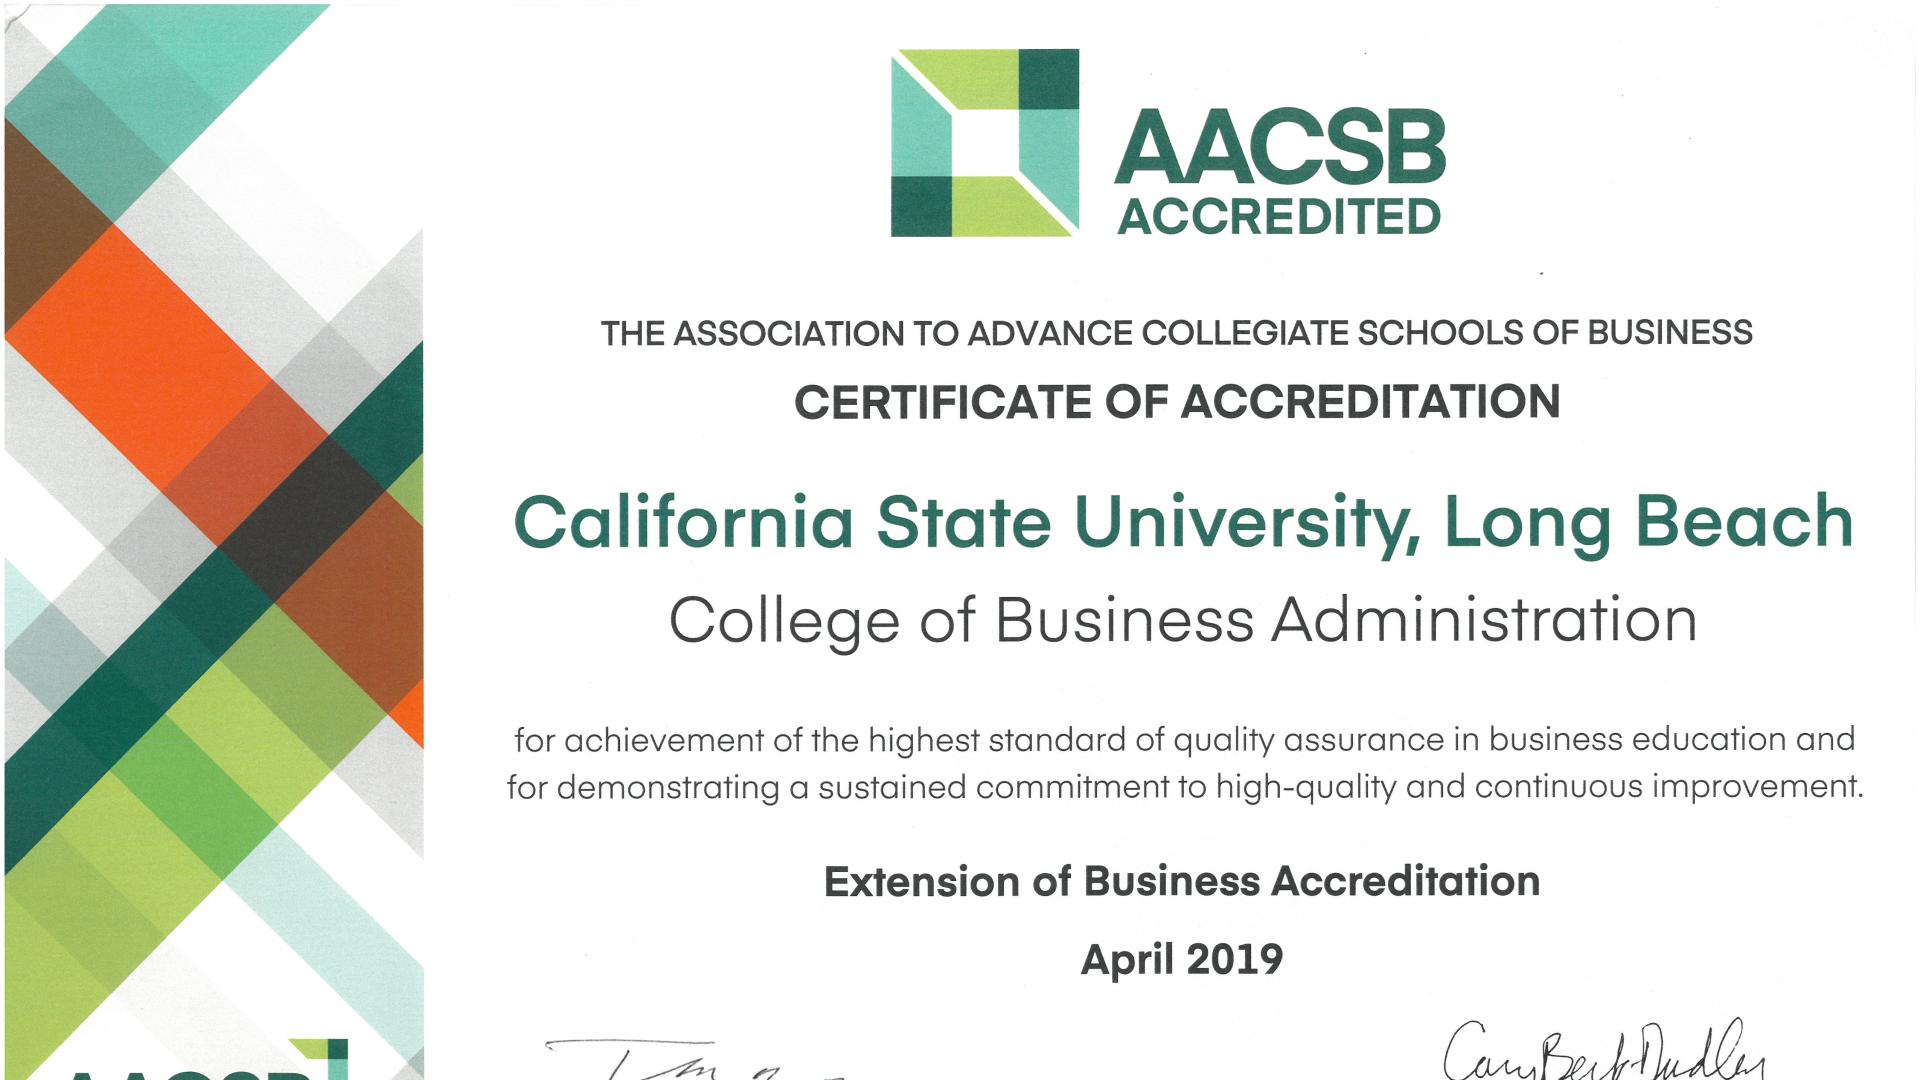 AACSB Official Certification document Dated MAY 2019